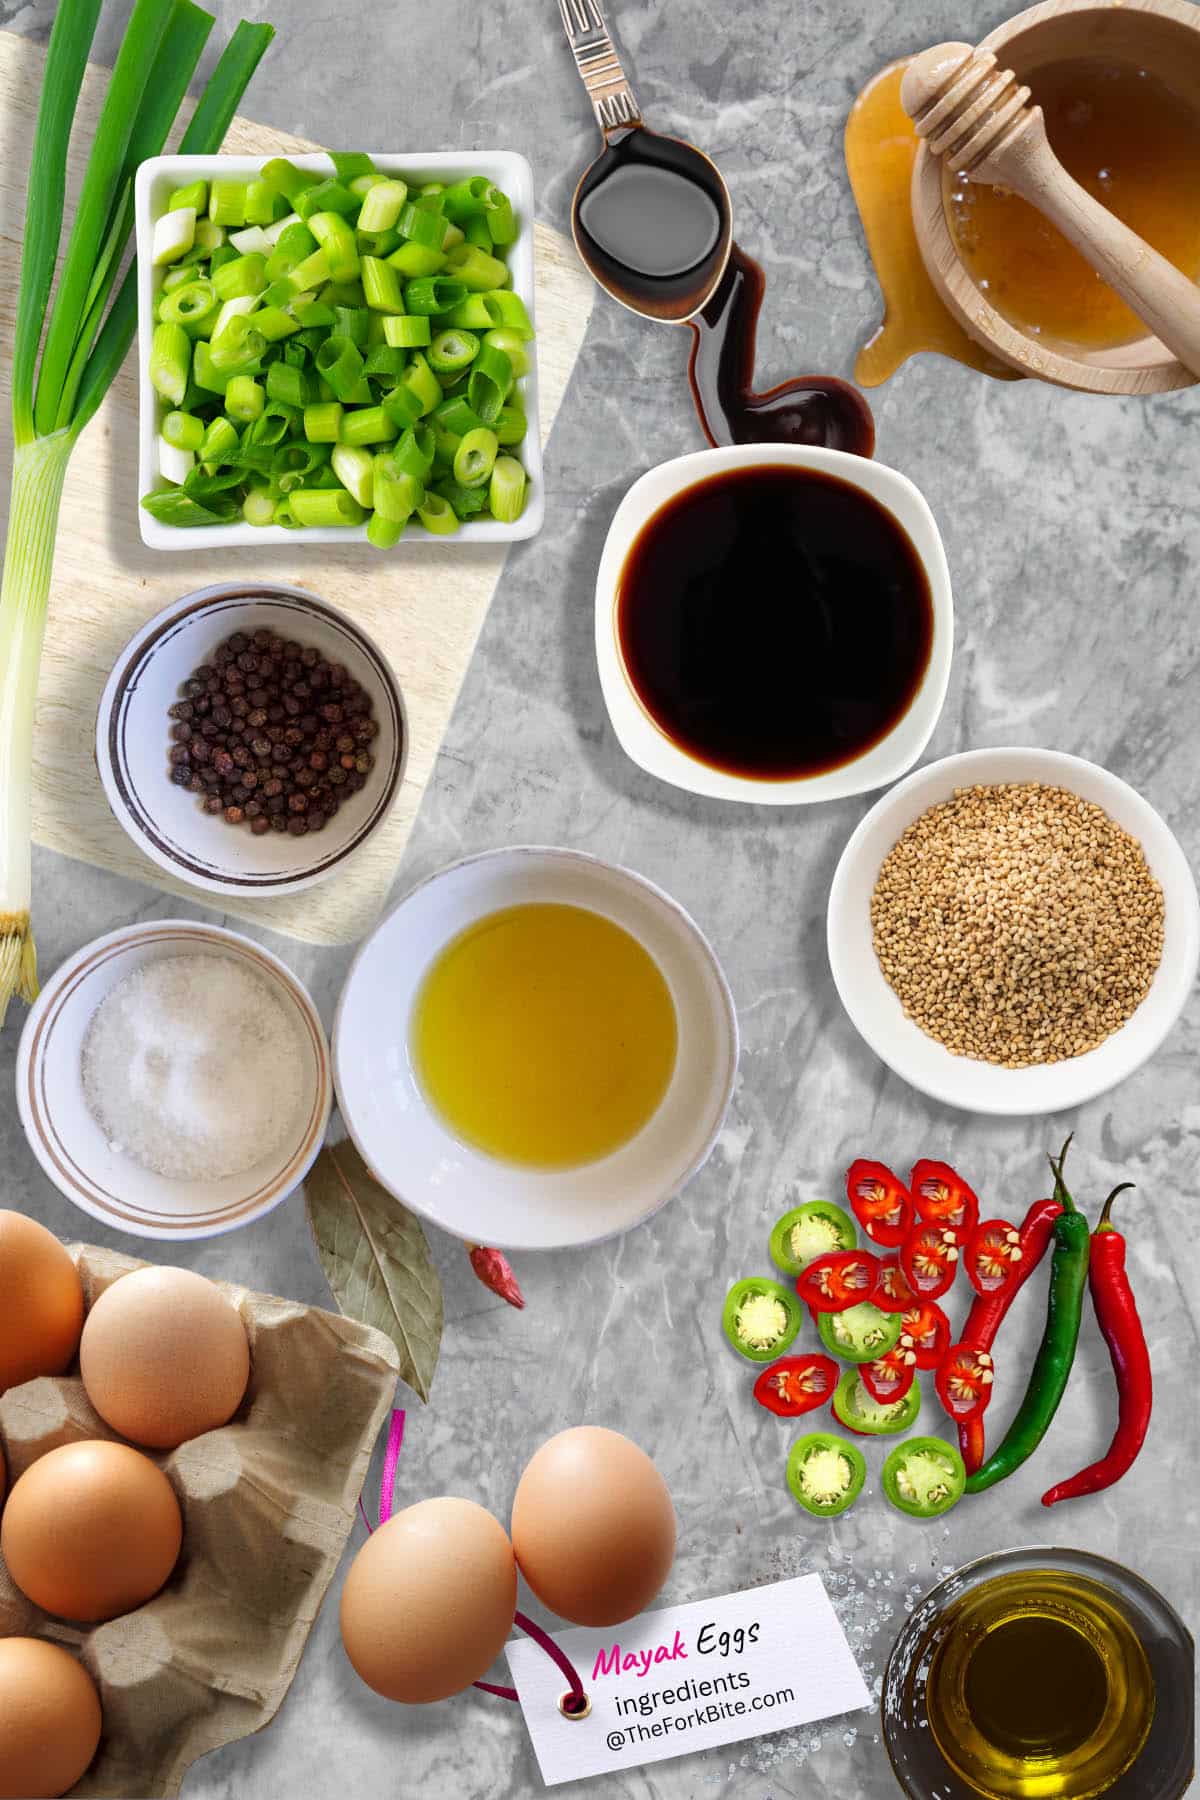 Mayak Egg marinade ingredients: soy sauce, honey, garlic, green onions, chili peppers. Prepare for a delicious Korean recipe.